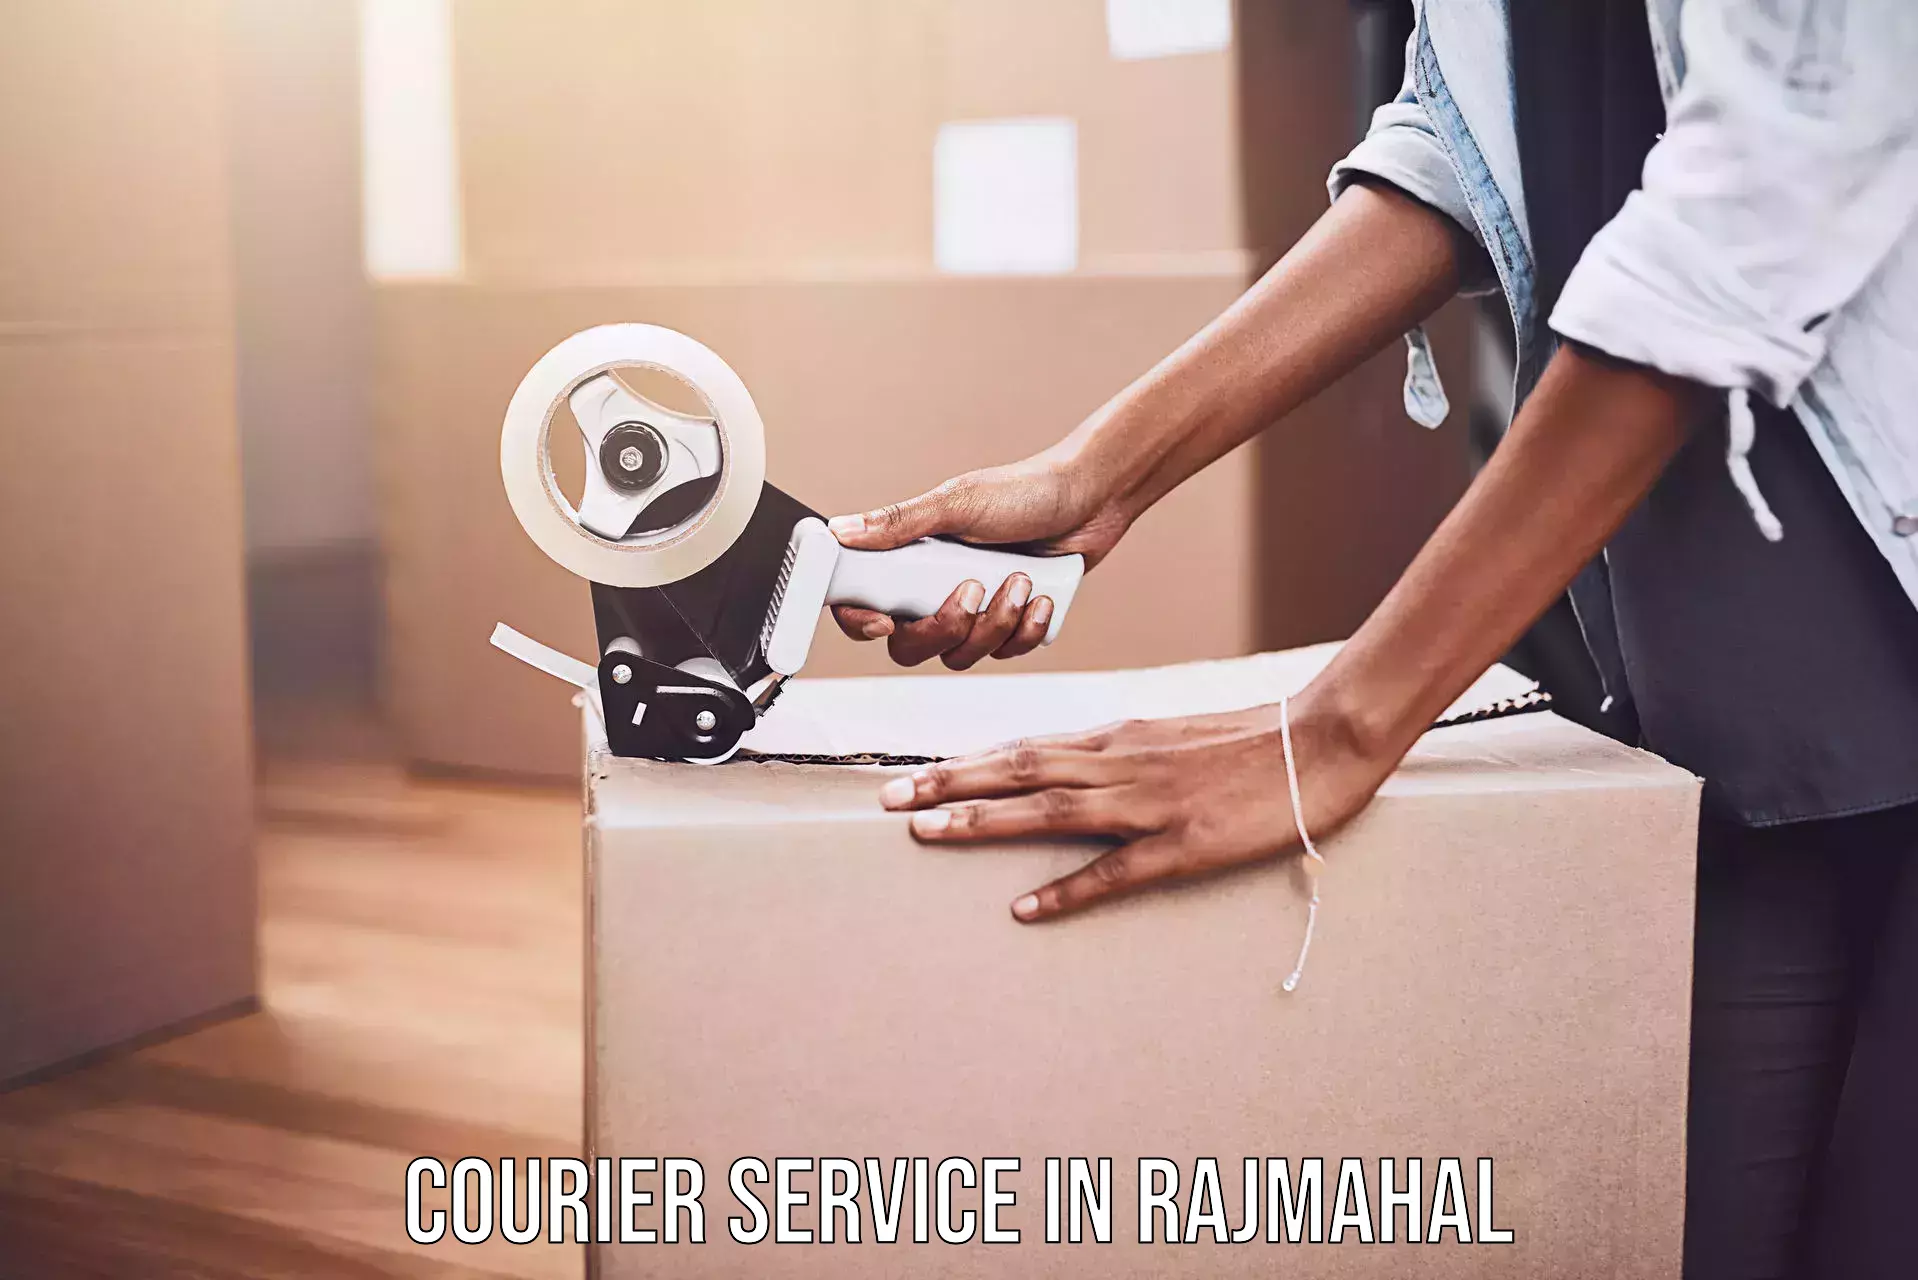 Courier services in Rajmahal